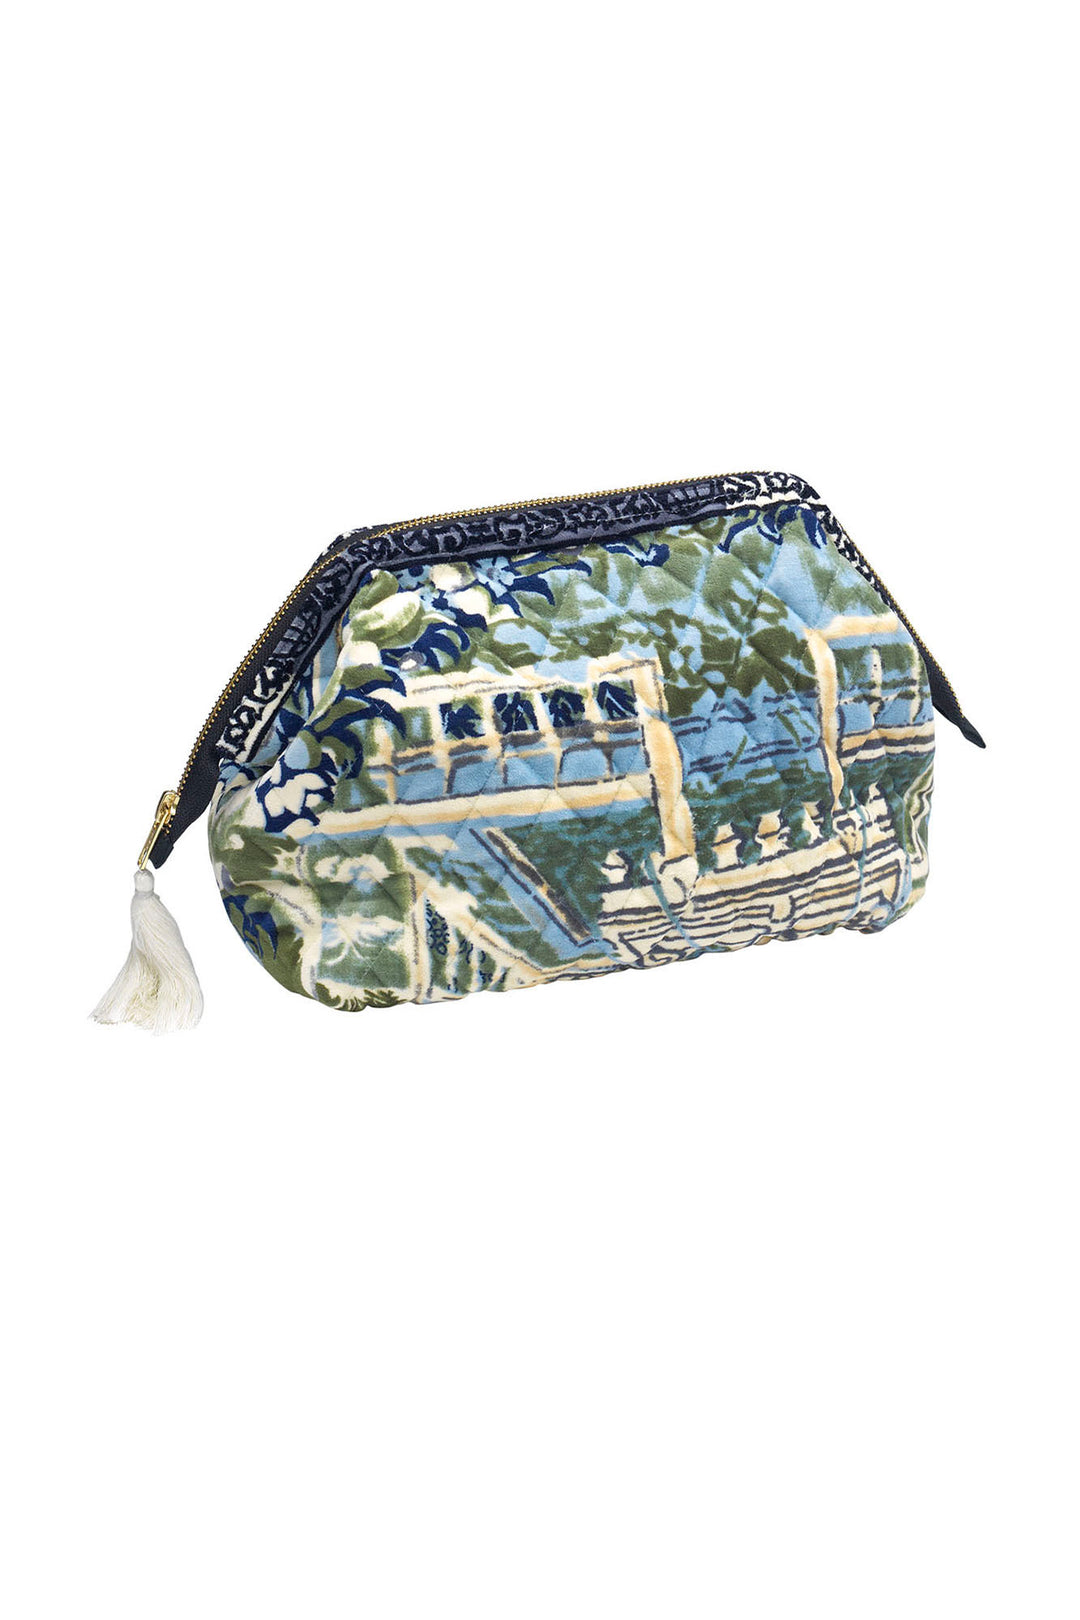 ladies velvet make-up clutch bag beautiful garden scenes in sea greens and blues by One Hundred Stars